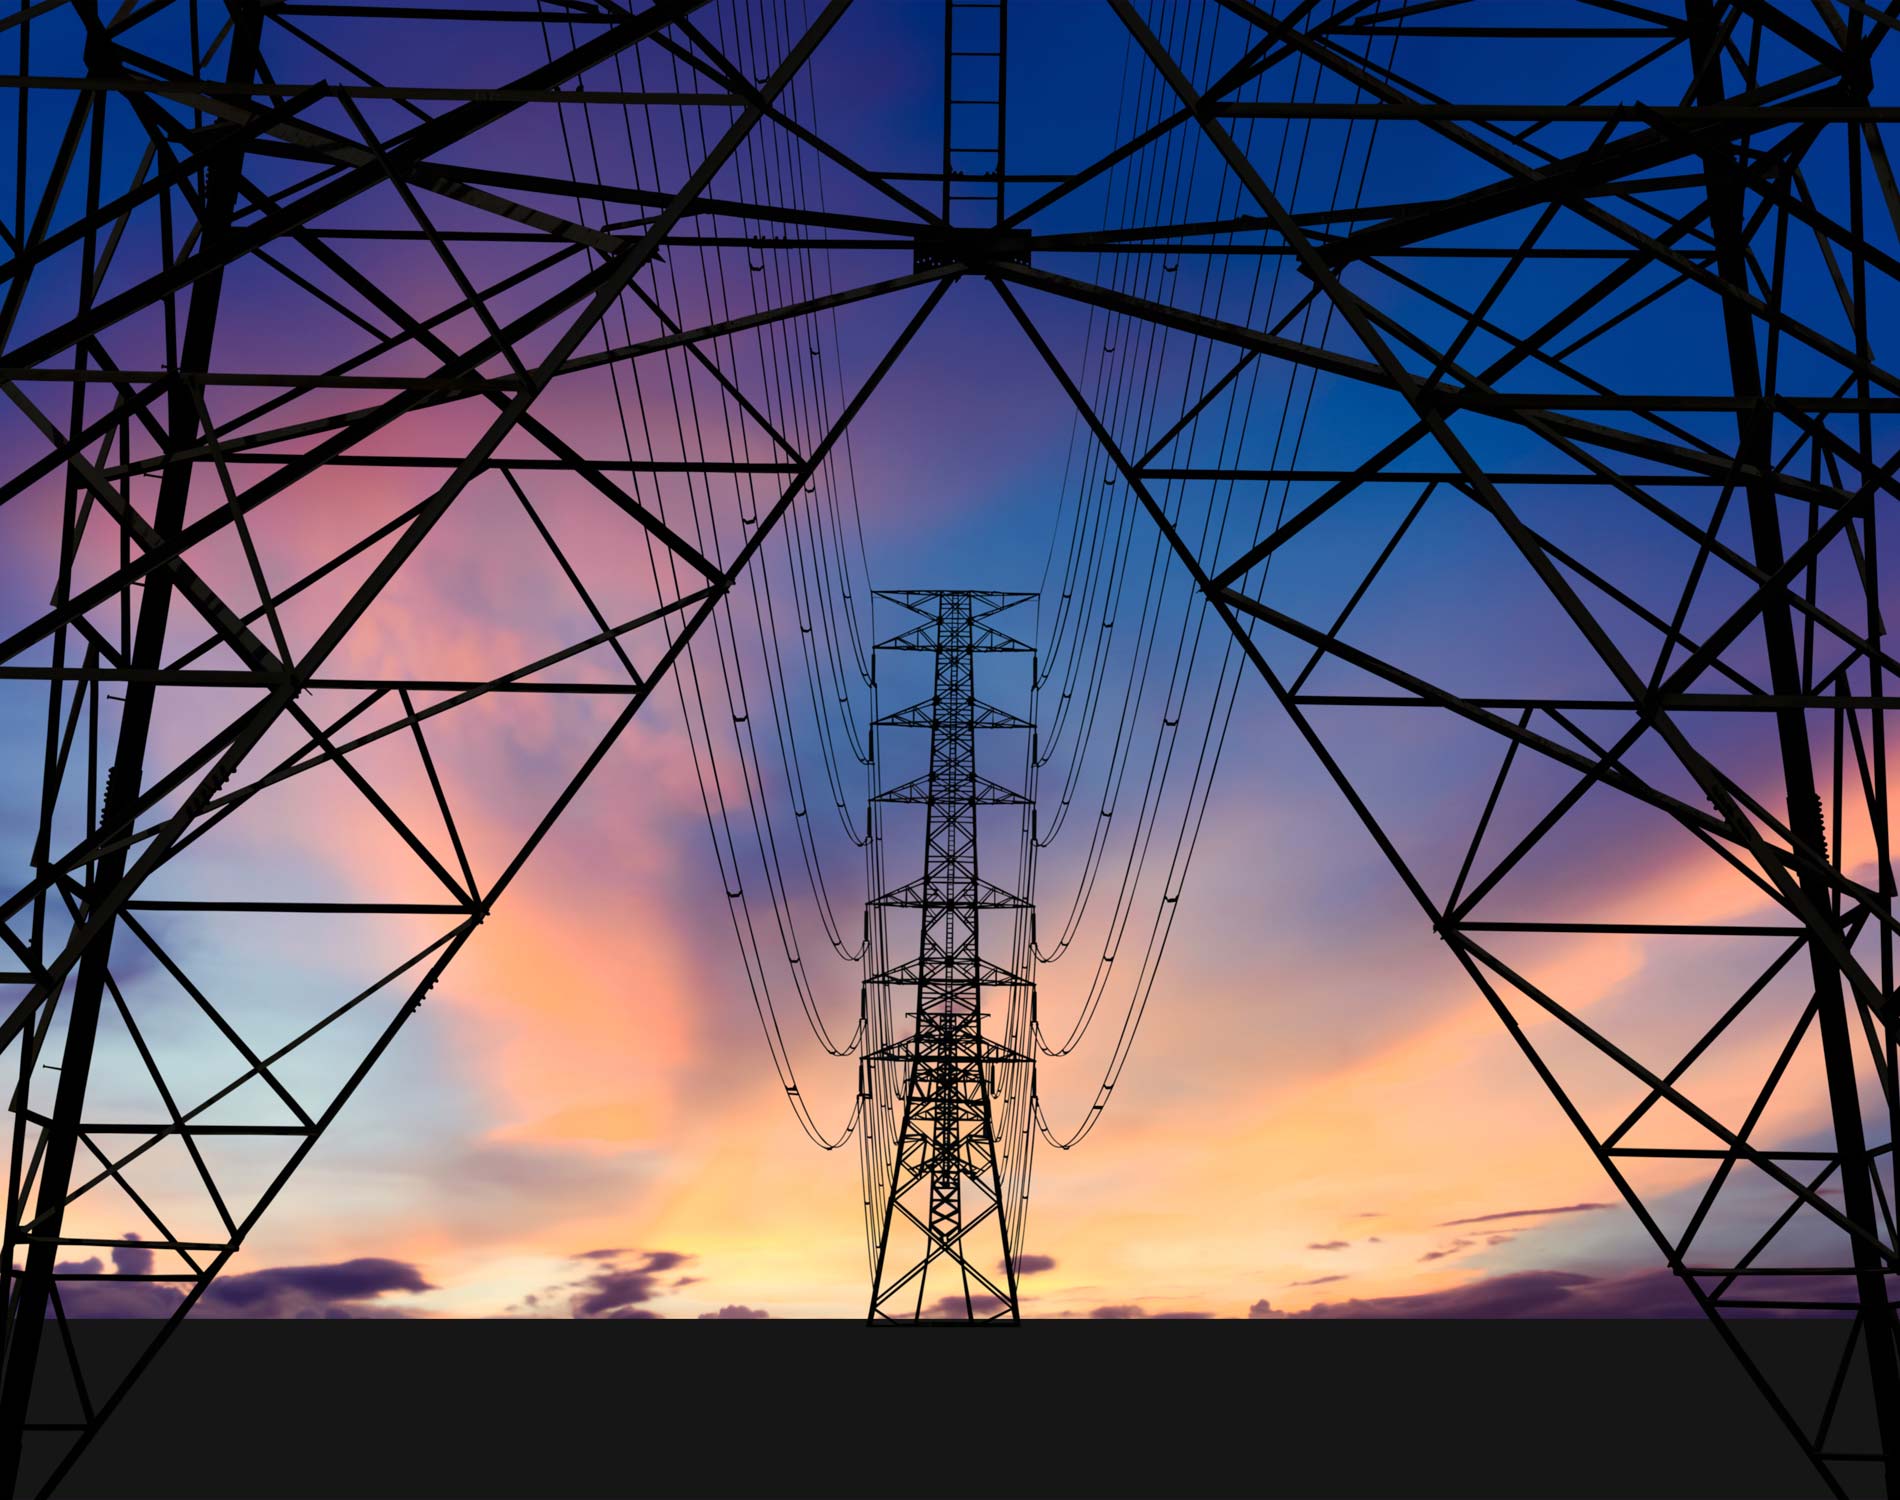 /-/media/images/website/background-images/industry-sectors/energy/energy_electric_towers.ashx?sc_lang=fr-ca